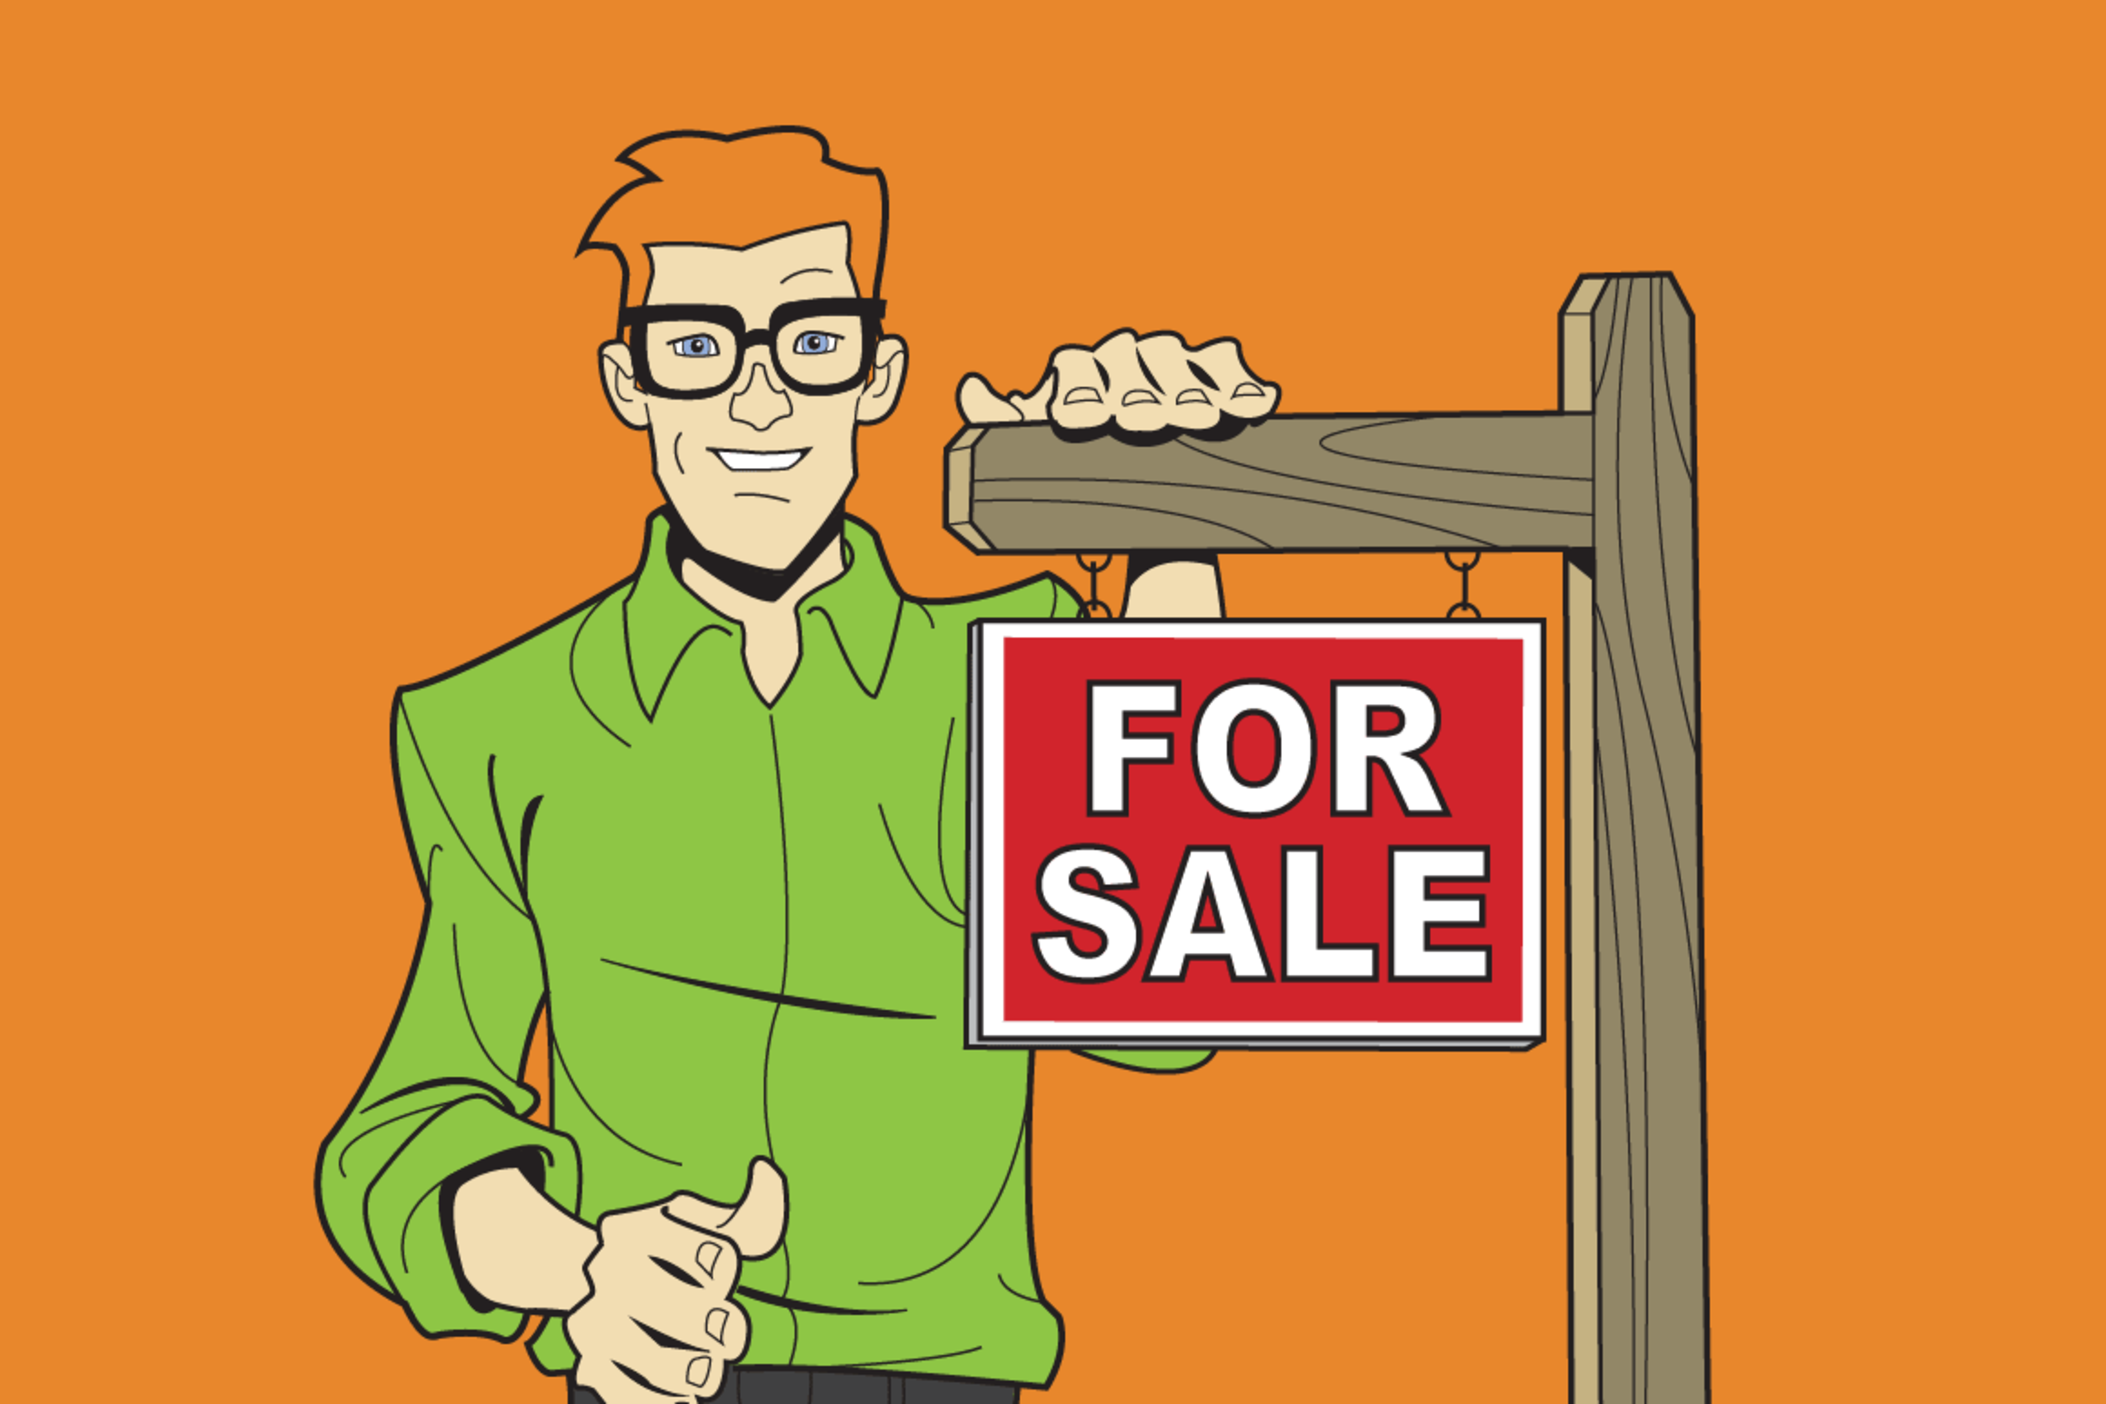 Consumer Ed with For Sale sign